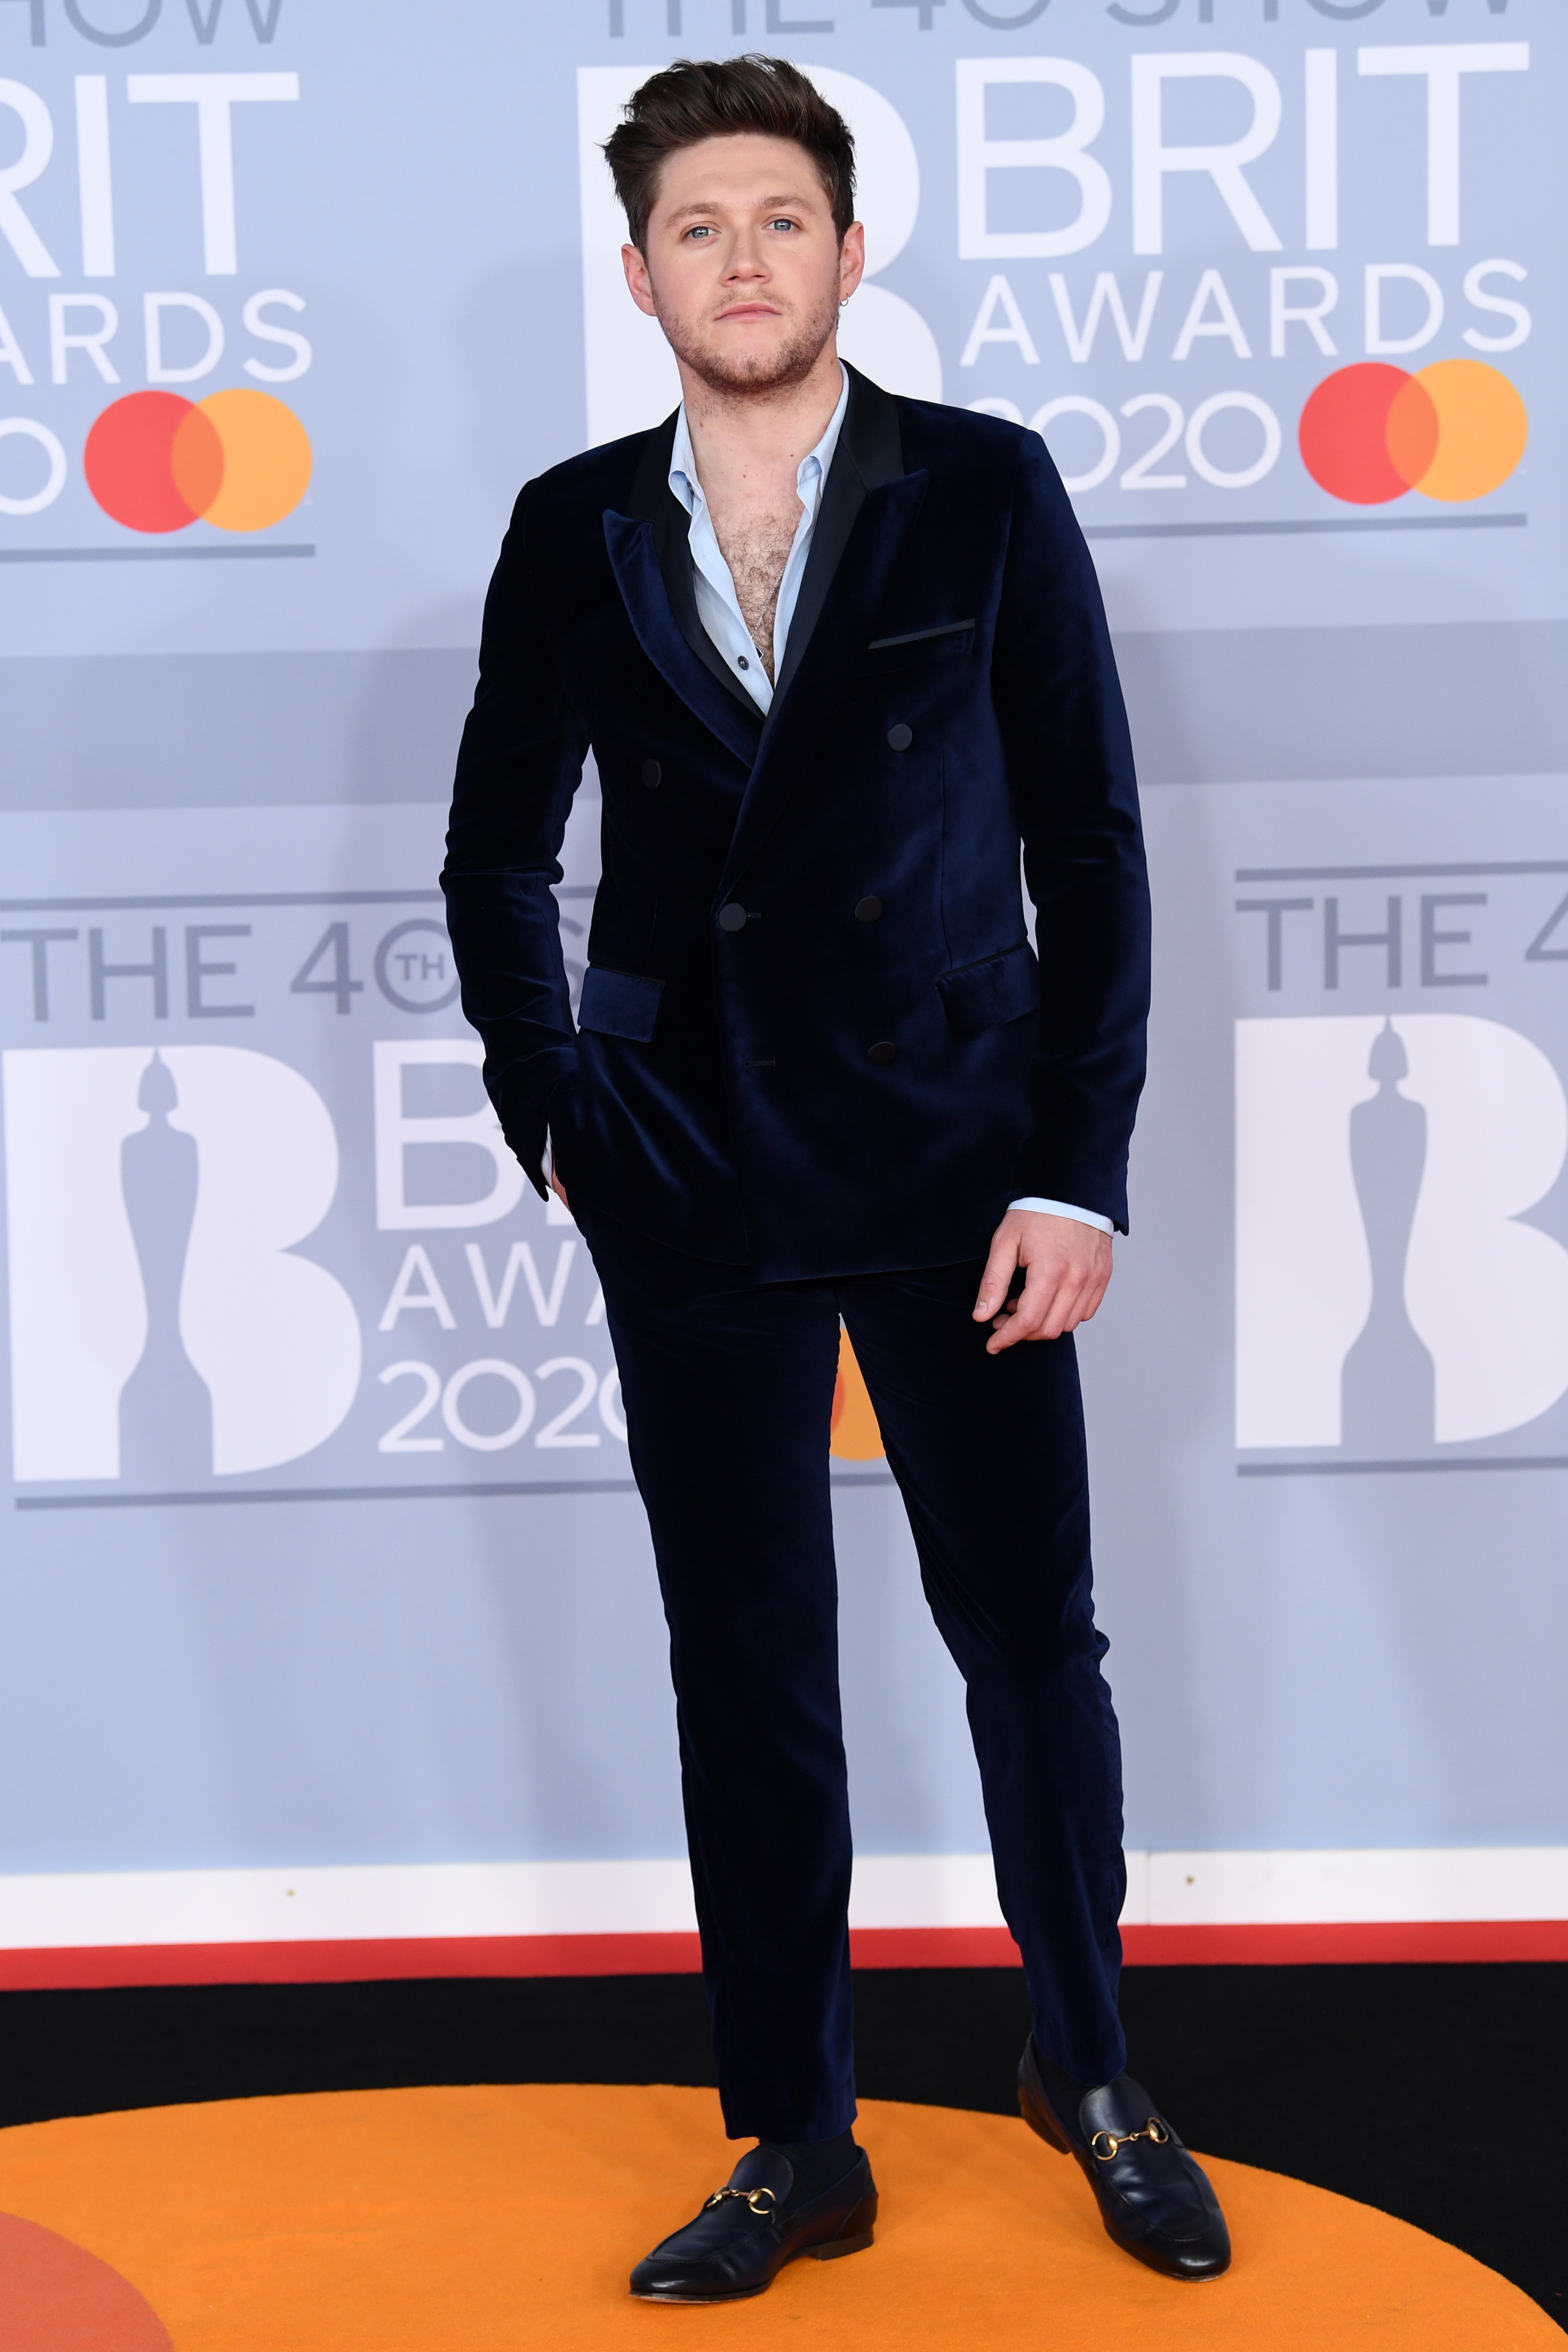 Brit Awards 2020: Red Carpet Photos, Best, Worst Looks, Outfits | J-14